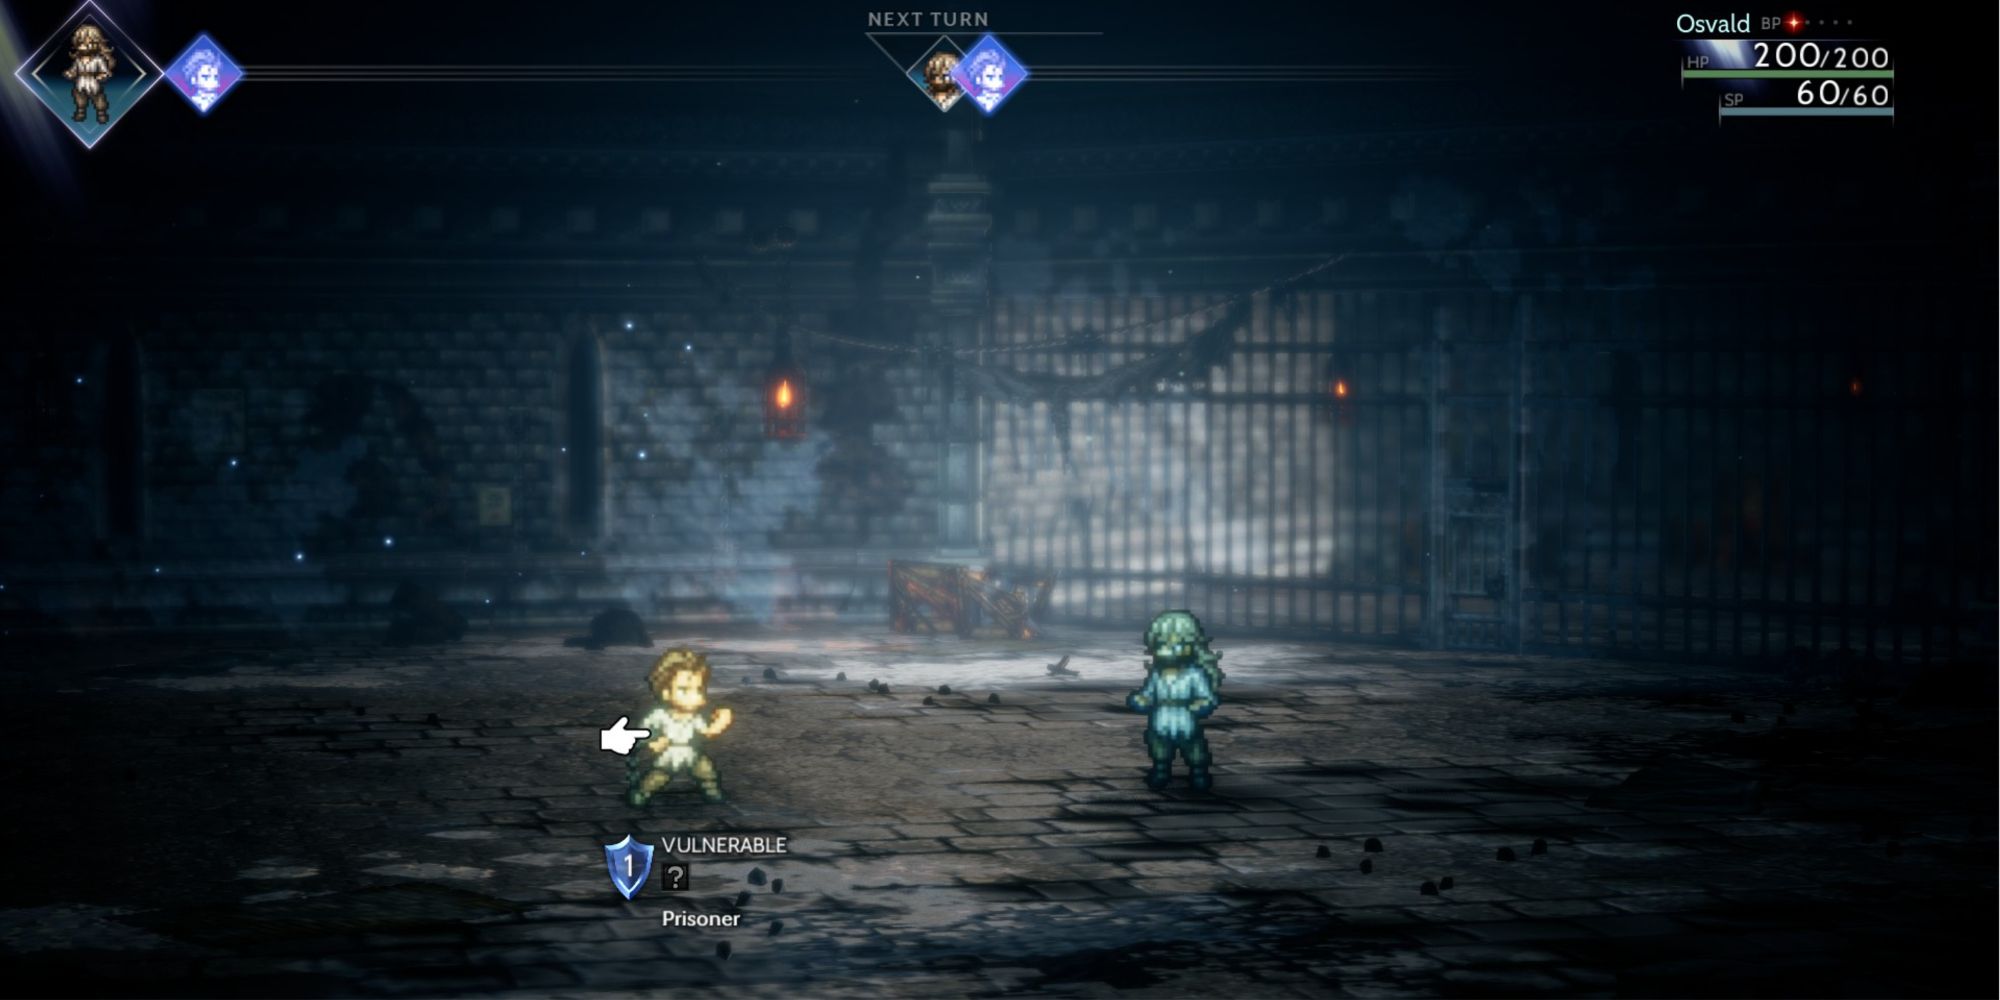 Octopath Traveler 2 - Osvald in combat with a prisoner